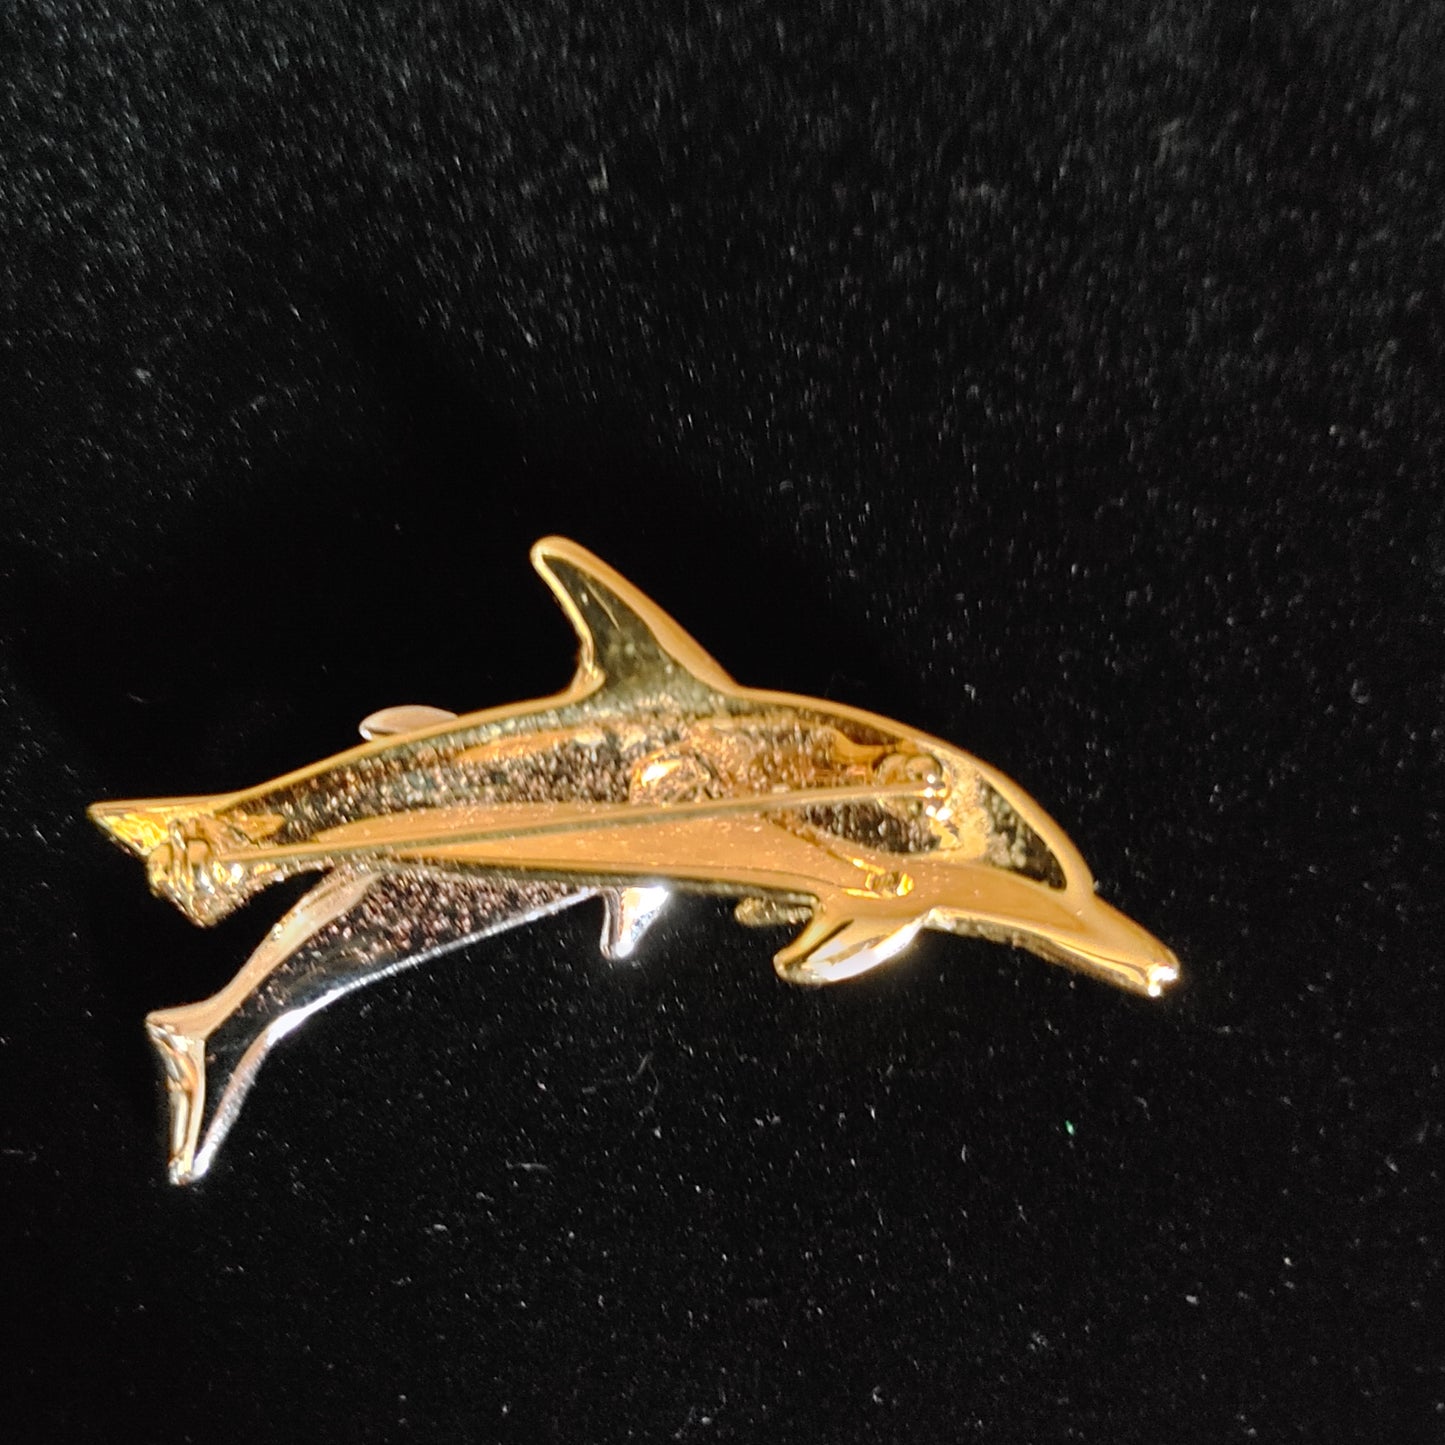 Swarovski Set! Dolphins Mother Child Pin Brooch Gold Crystals Swan Free Shipping